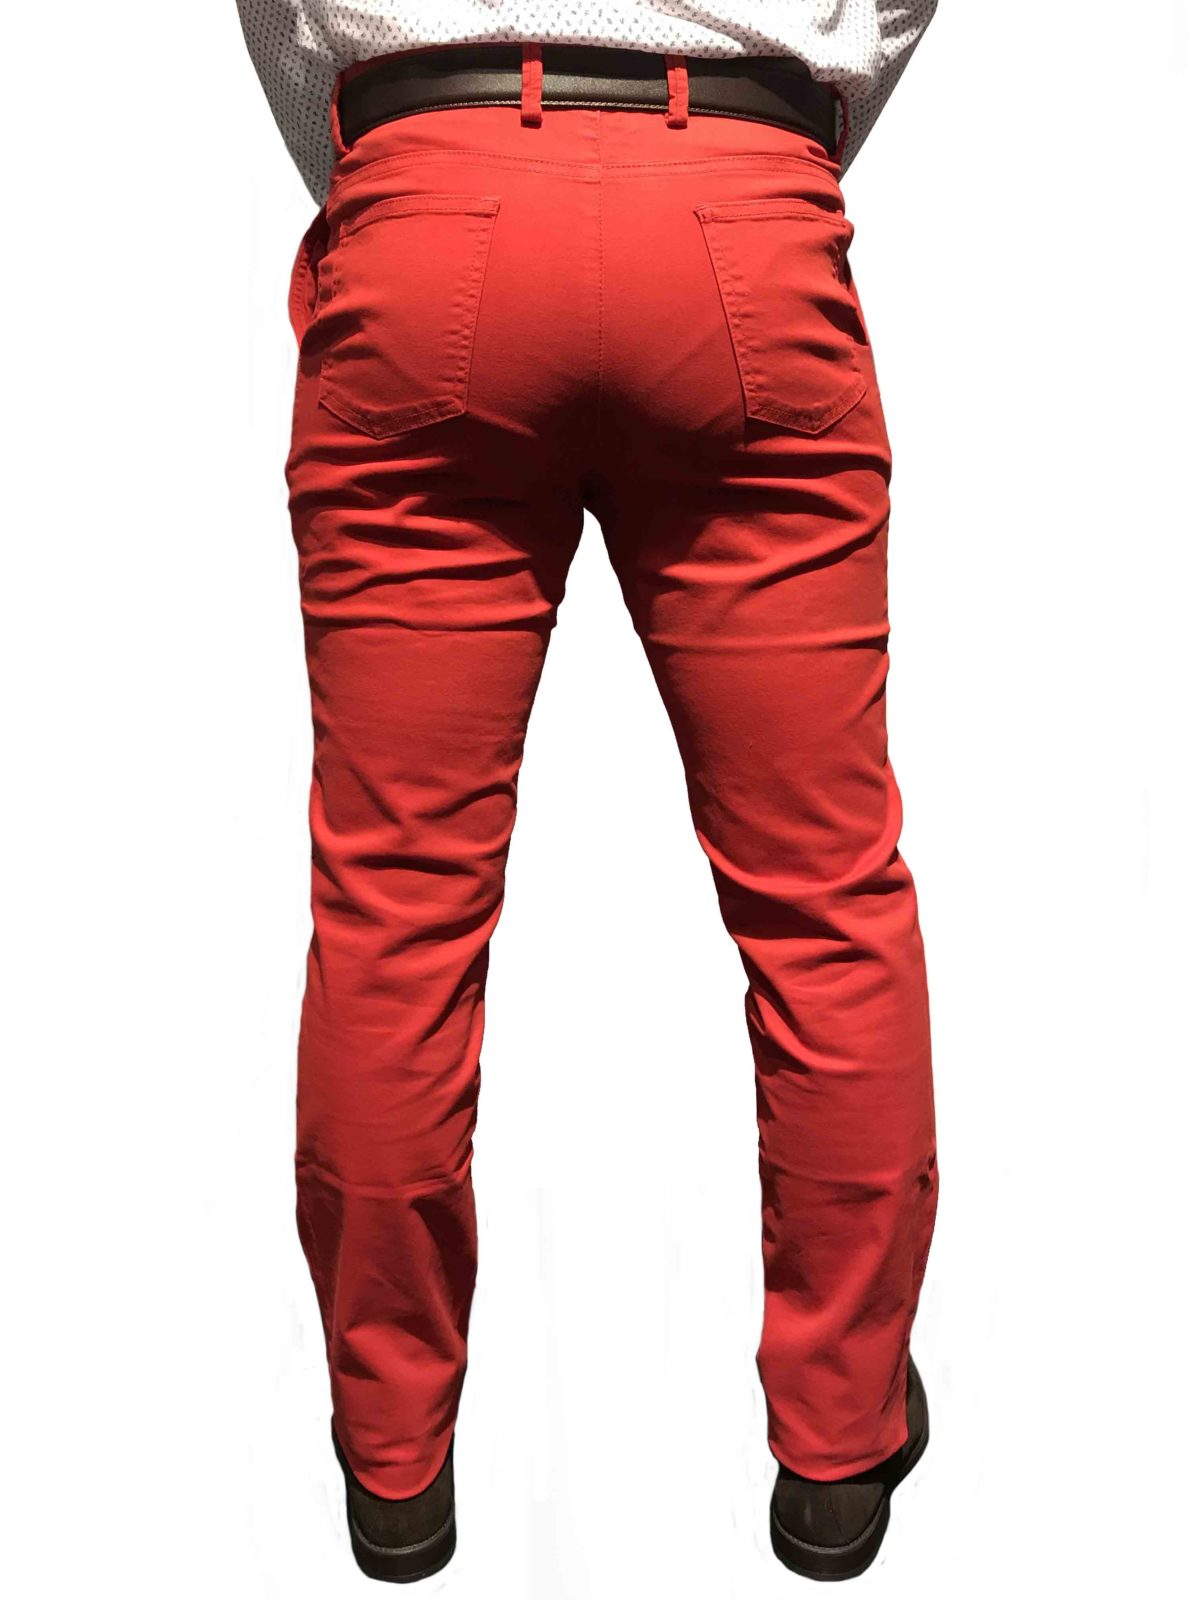 Ben Brown | BBP-15 Red chino